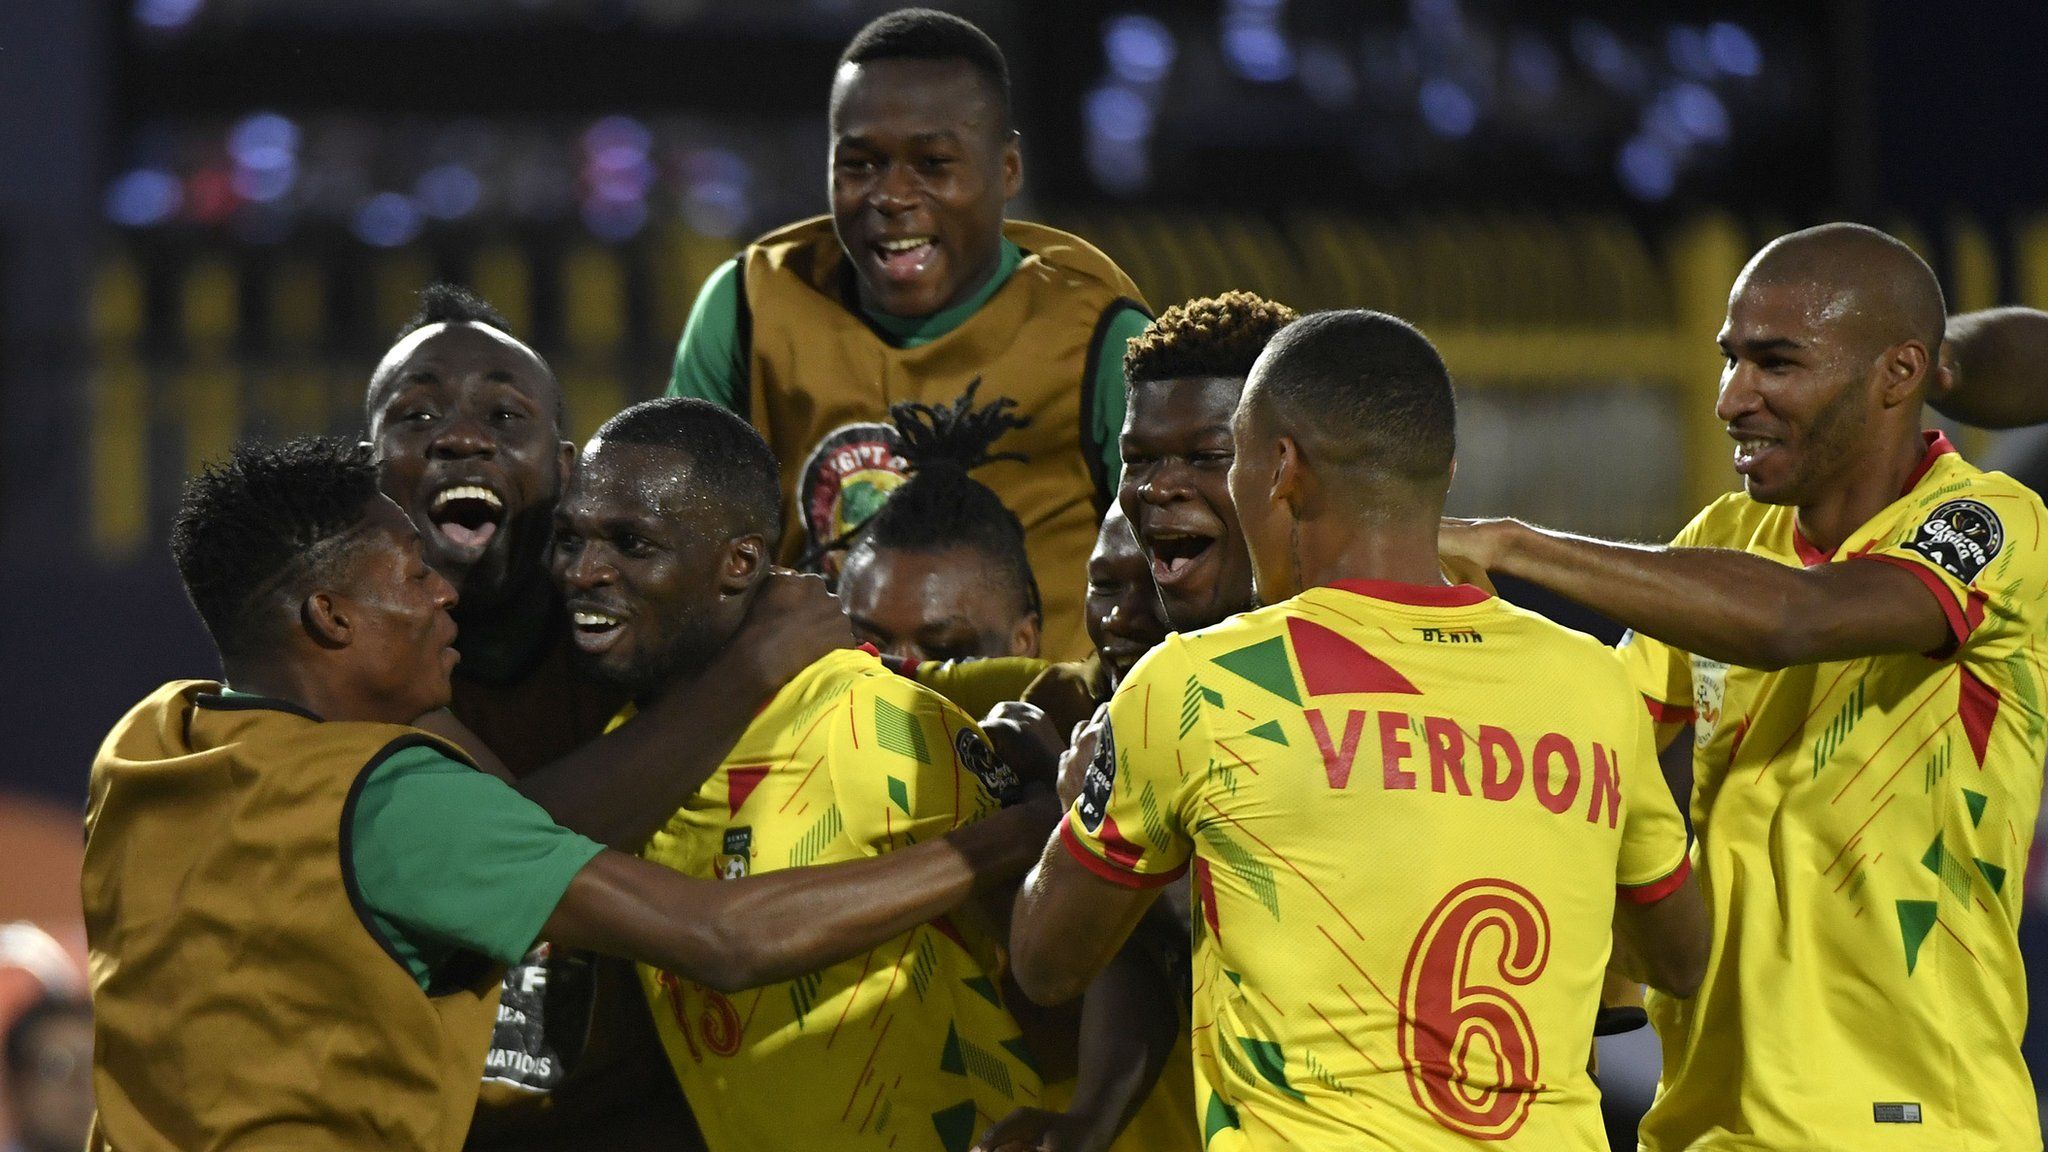 Benin's players celebrate scoring against Morocco at the Africa Cup of Nations